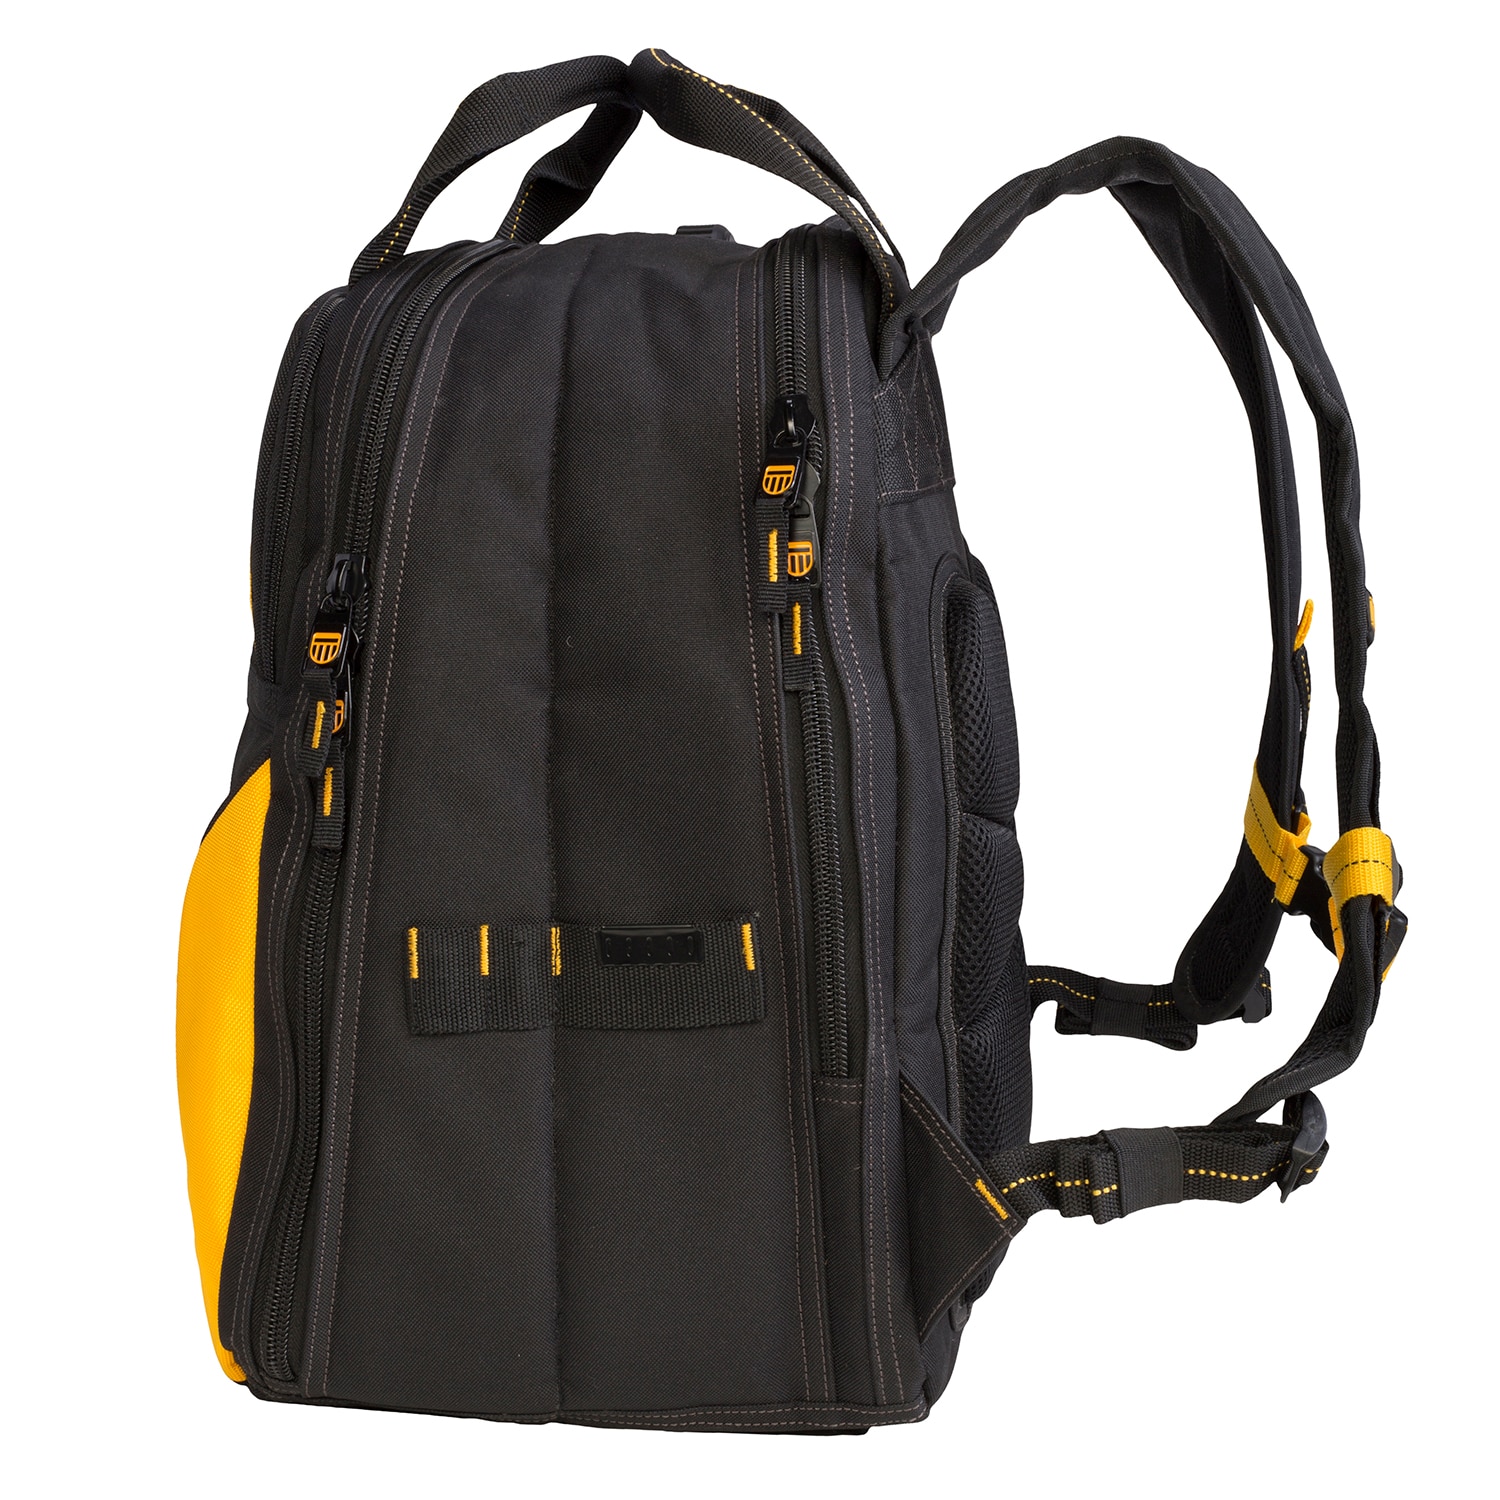 DEWALT Black/Yellow Polyester 6-in Backpack at Lowes.com